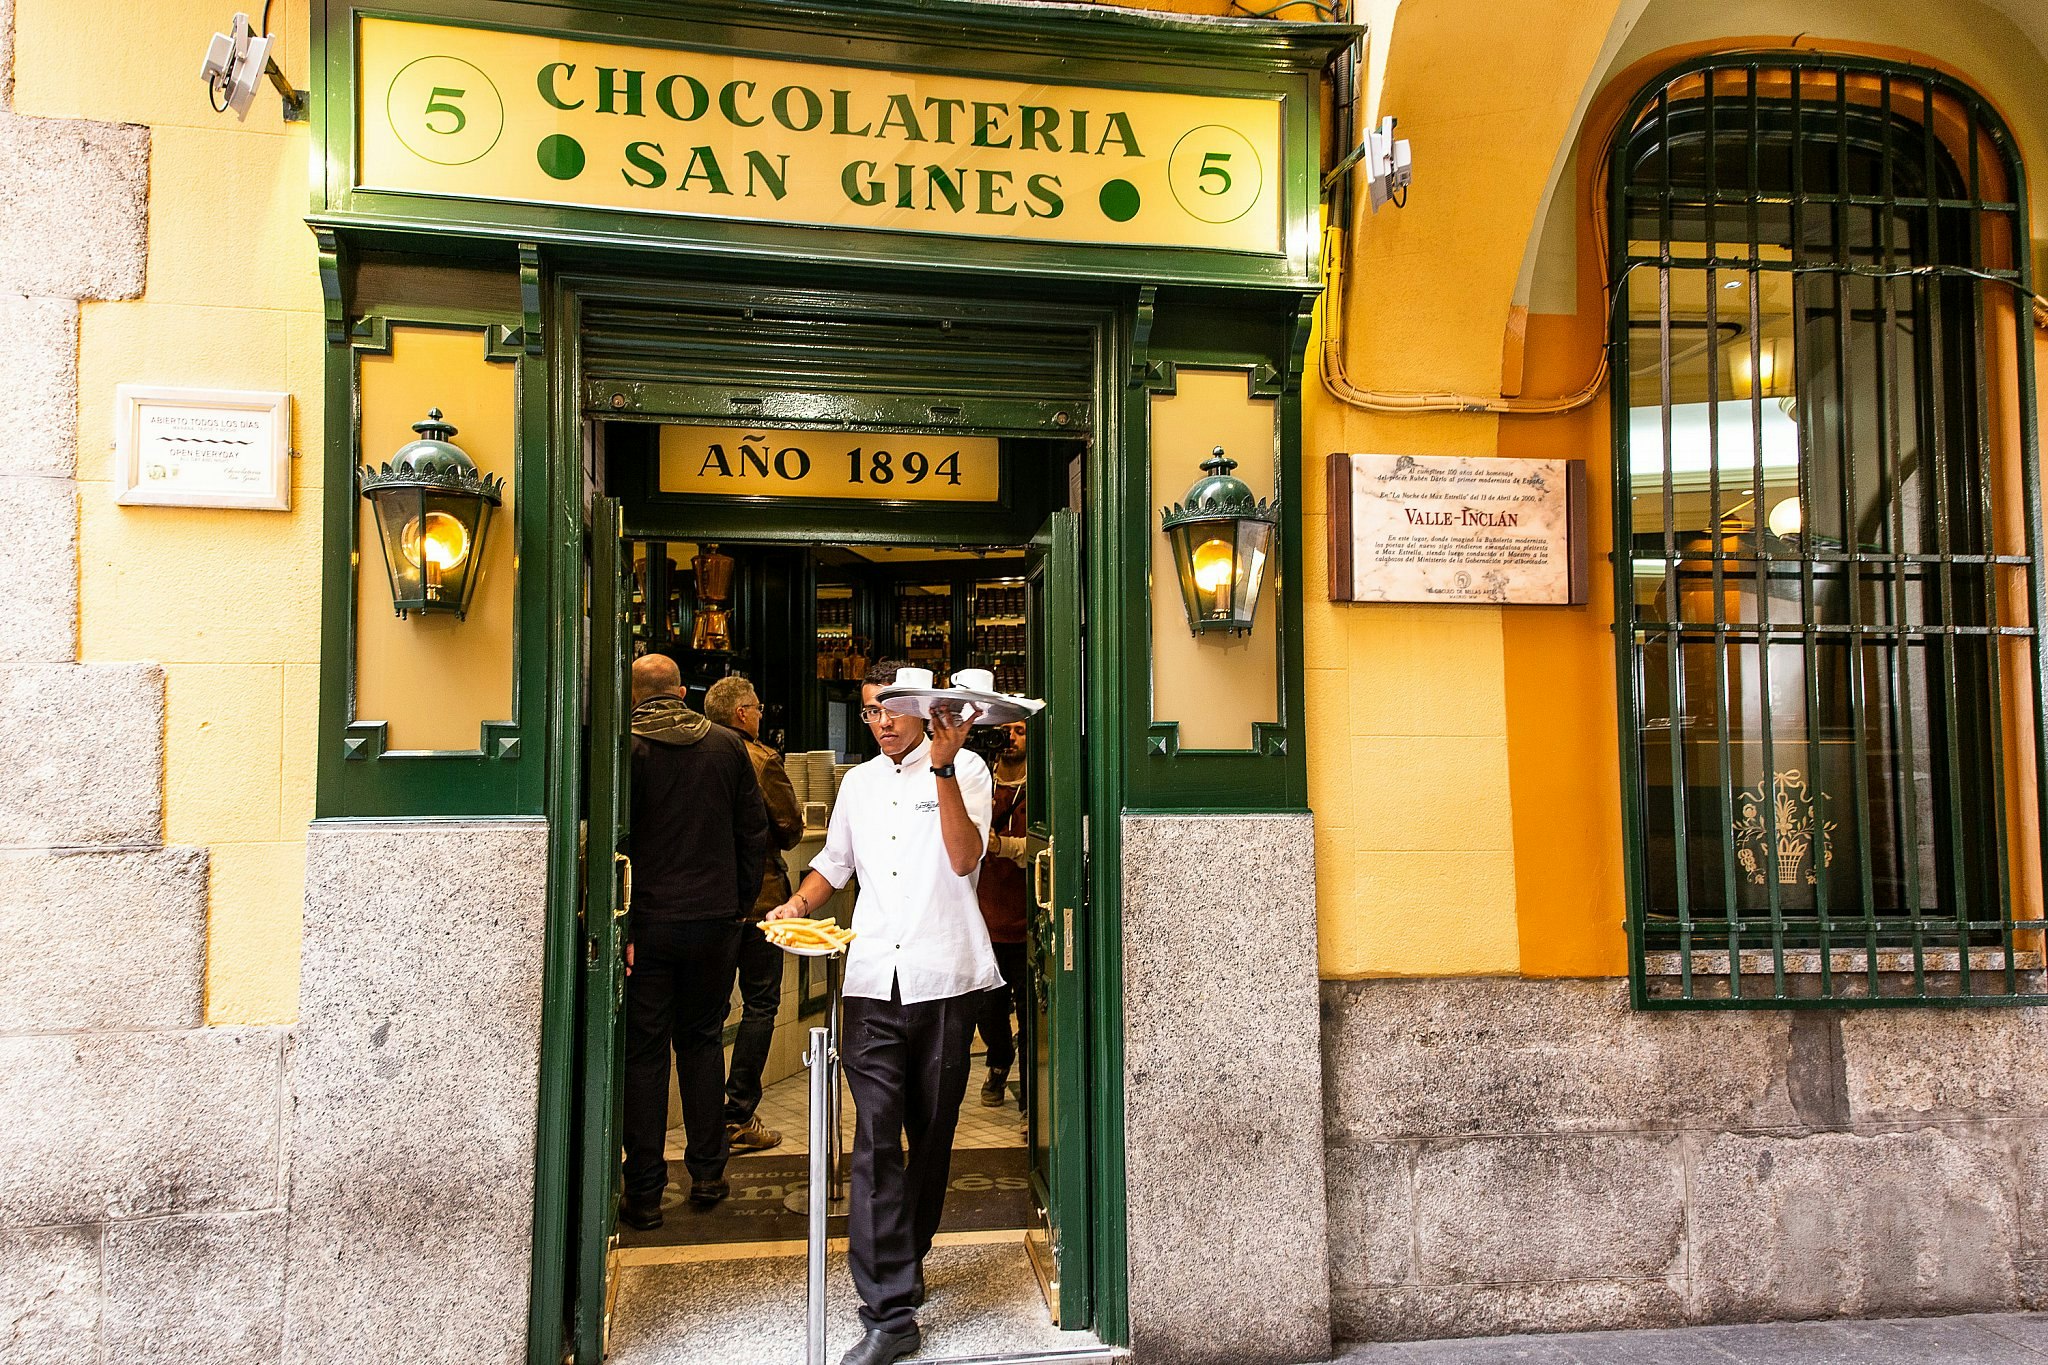 A waiter bearing plates of churros and chocolate emerges from Chocolatería San Ginés Madrid; the exterior is painted yellow with a green door frame and signs.